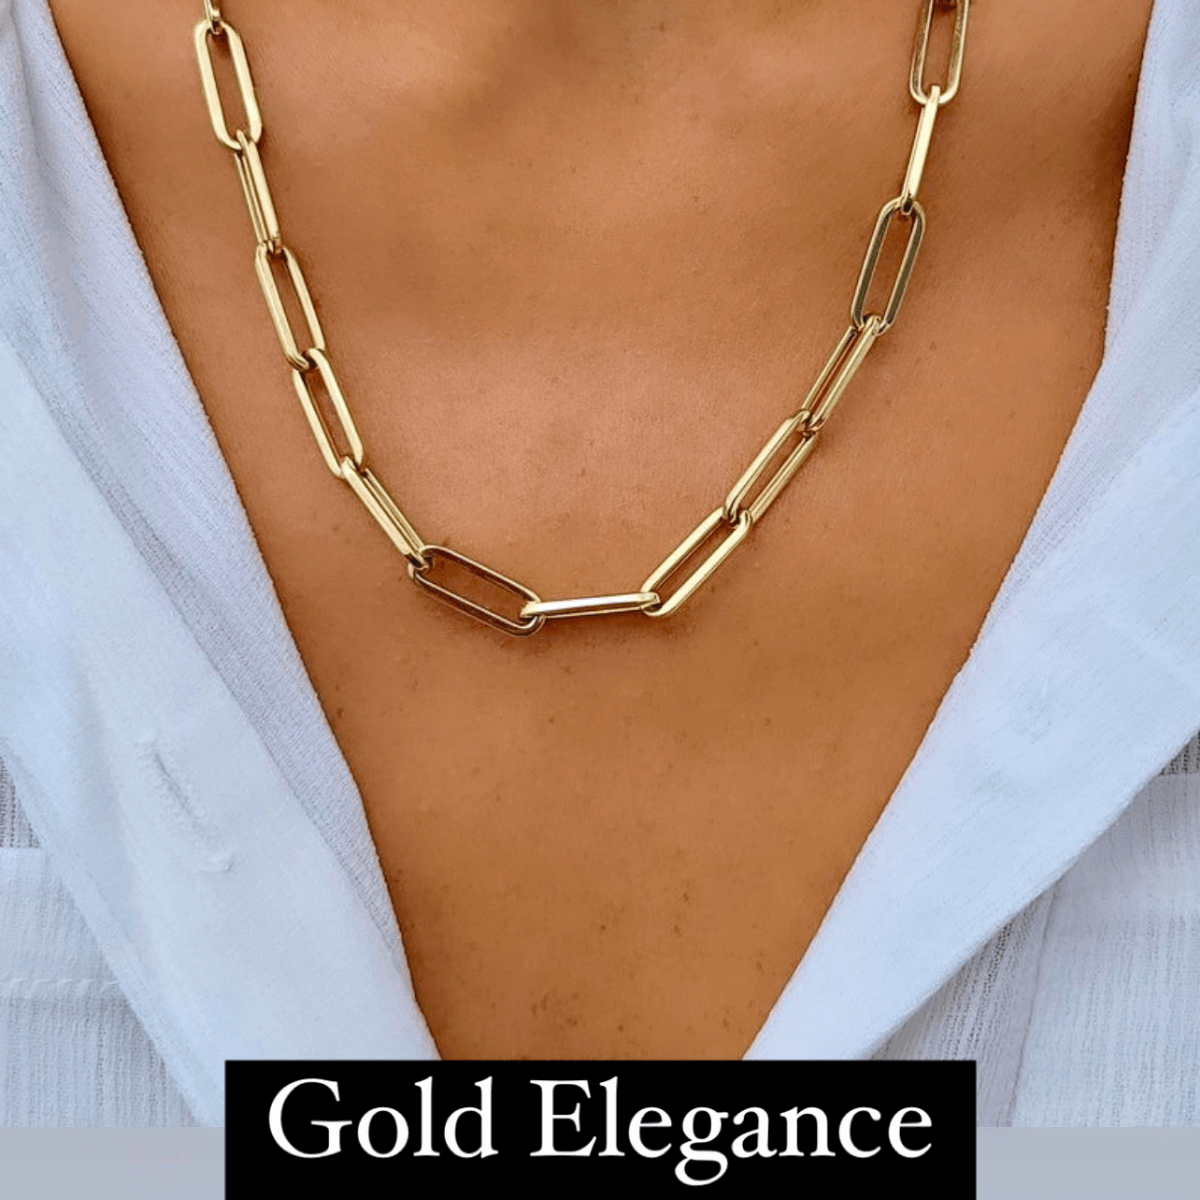 Best Gold Layering Chain Necklaces Bundle Jewelry Gift | Best Aesthetic Yellow Gold Chain Necklace Jewelry Gift for Women, Mother, Wife, Daughter 